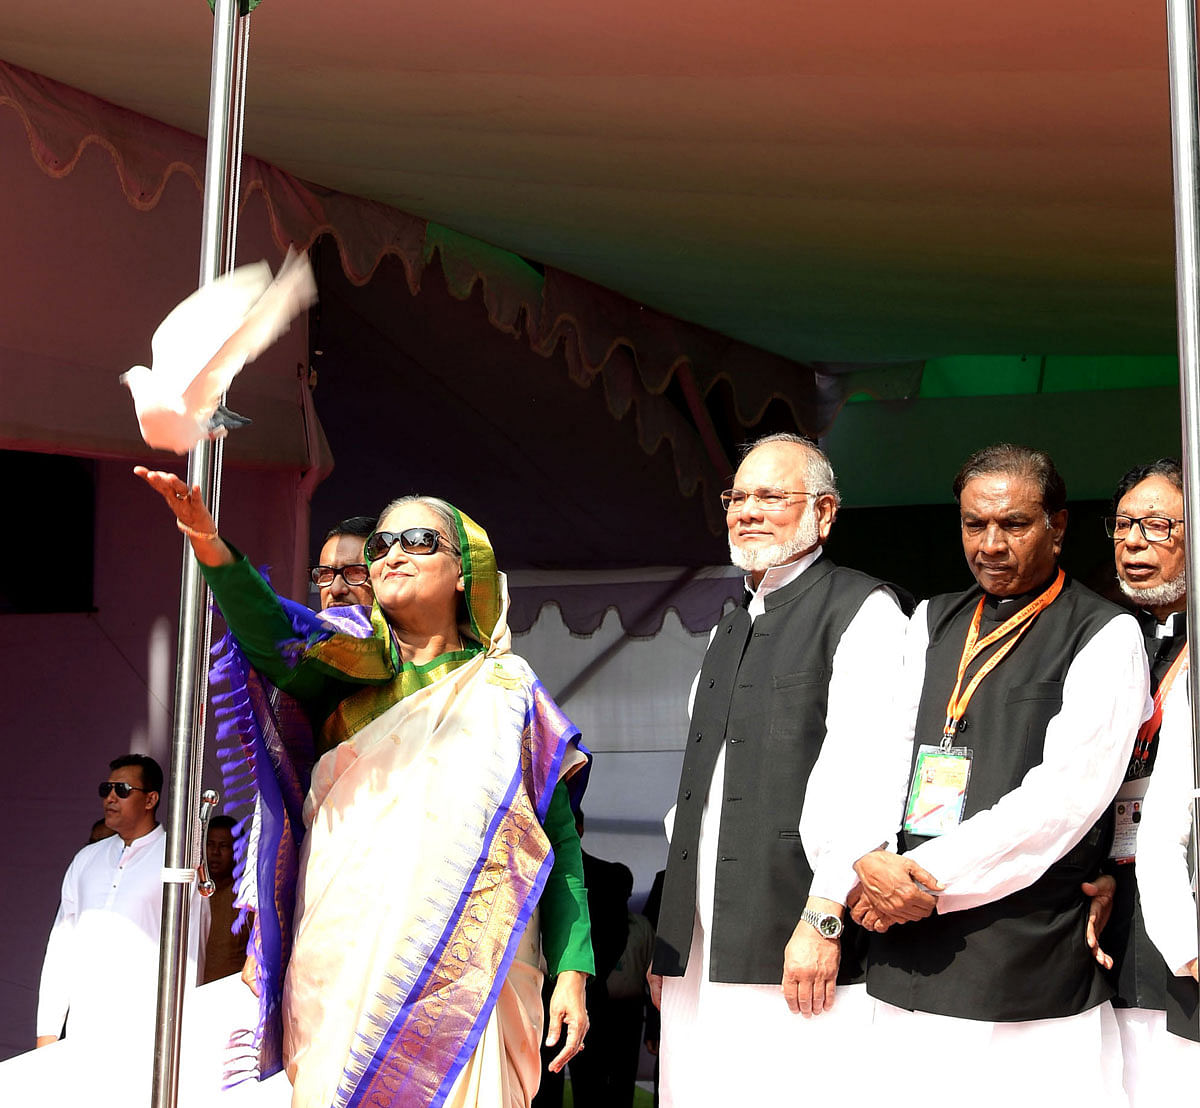 Prime minister Sheikh Hasina, also the Awami League president, opened the the triennial council of Dhaka north and south city units of AL as the chief guest by releasing pigeons. Photo: PID